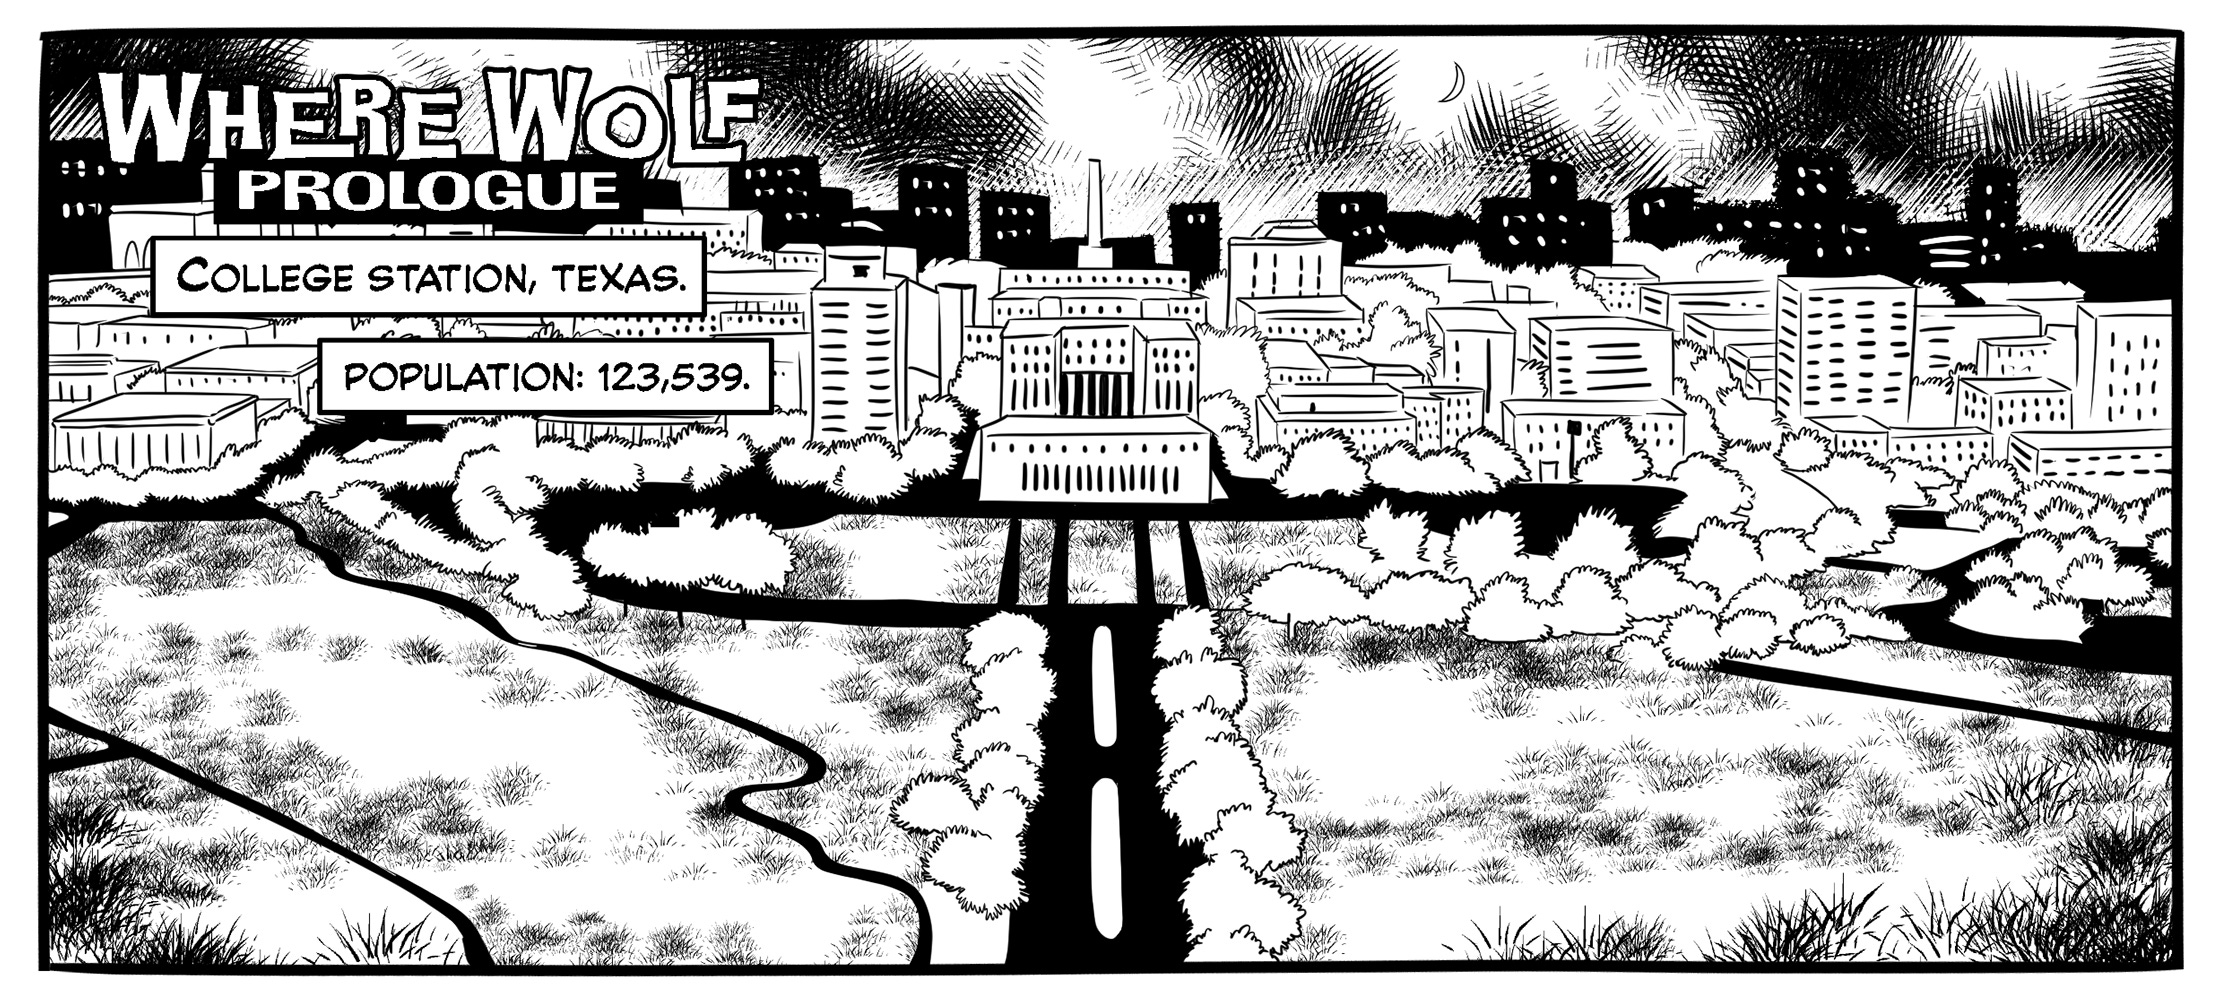 A black and white illustration of a rural city's downtown, surrounded by tree-lined scrubland. Text reads "Where Wolf Prologue. College Station, Texas. Population: 123,539."